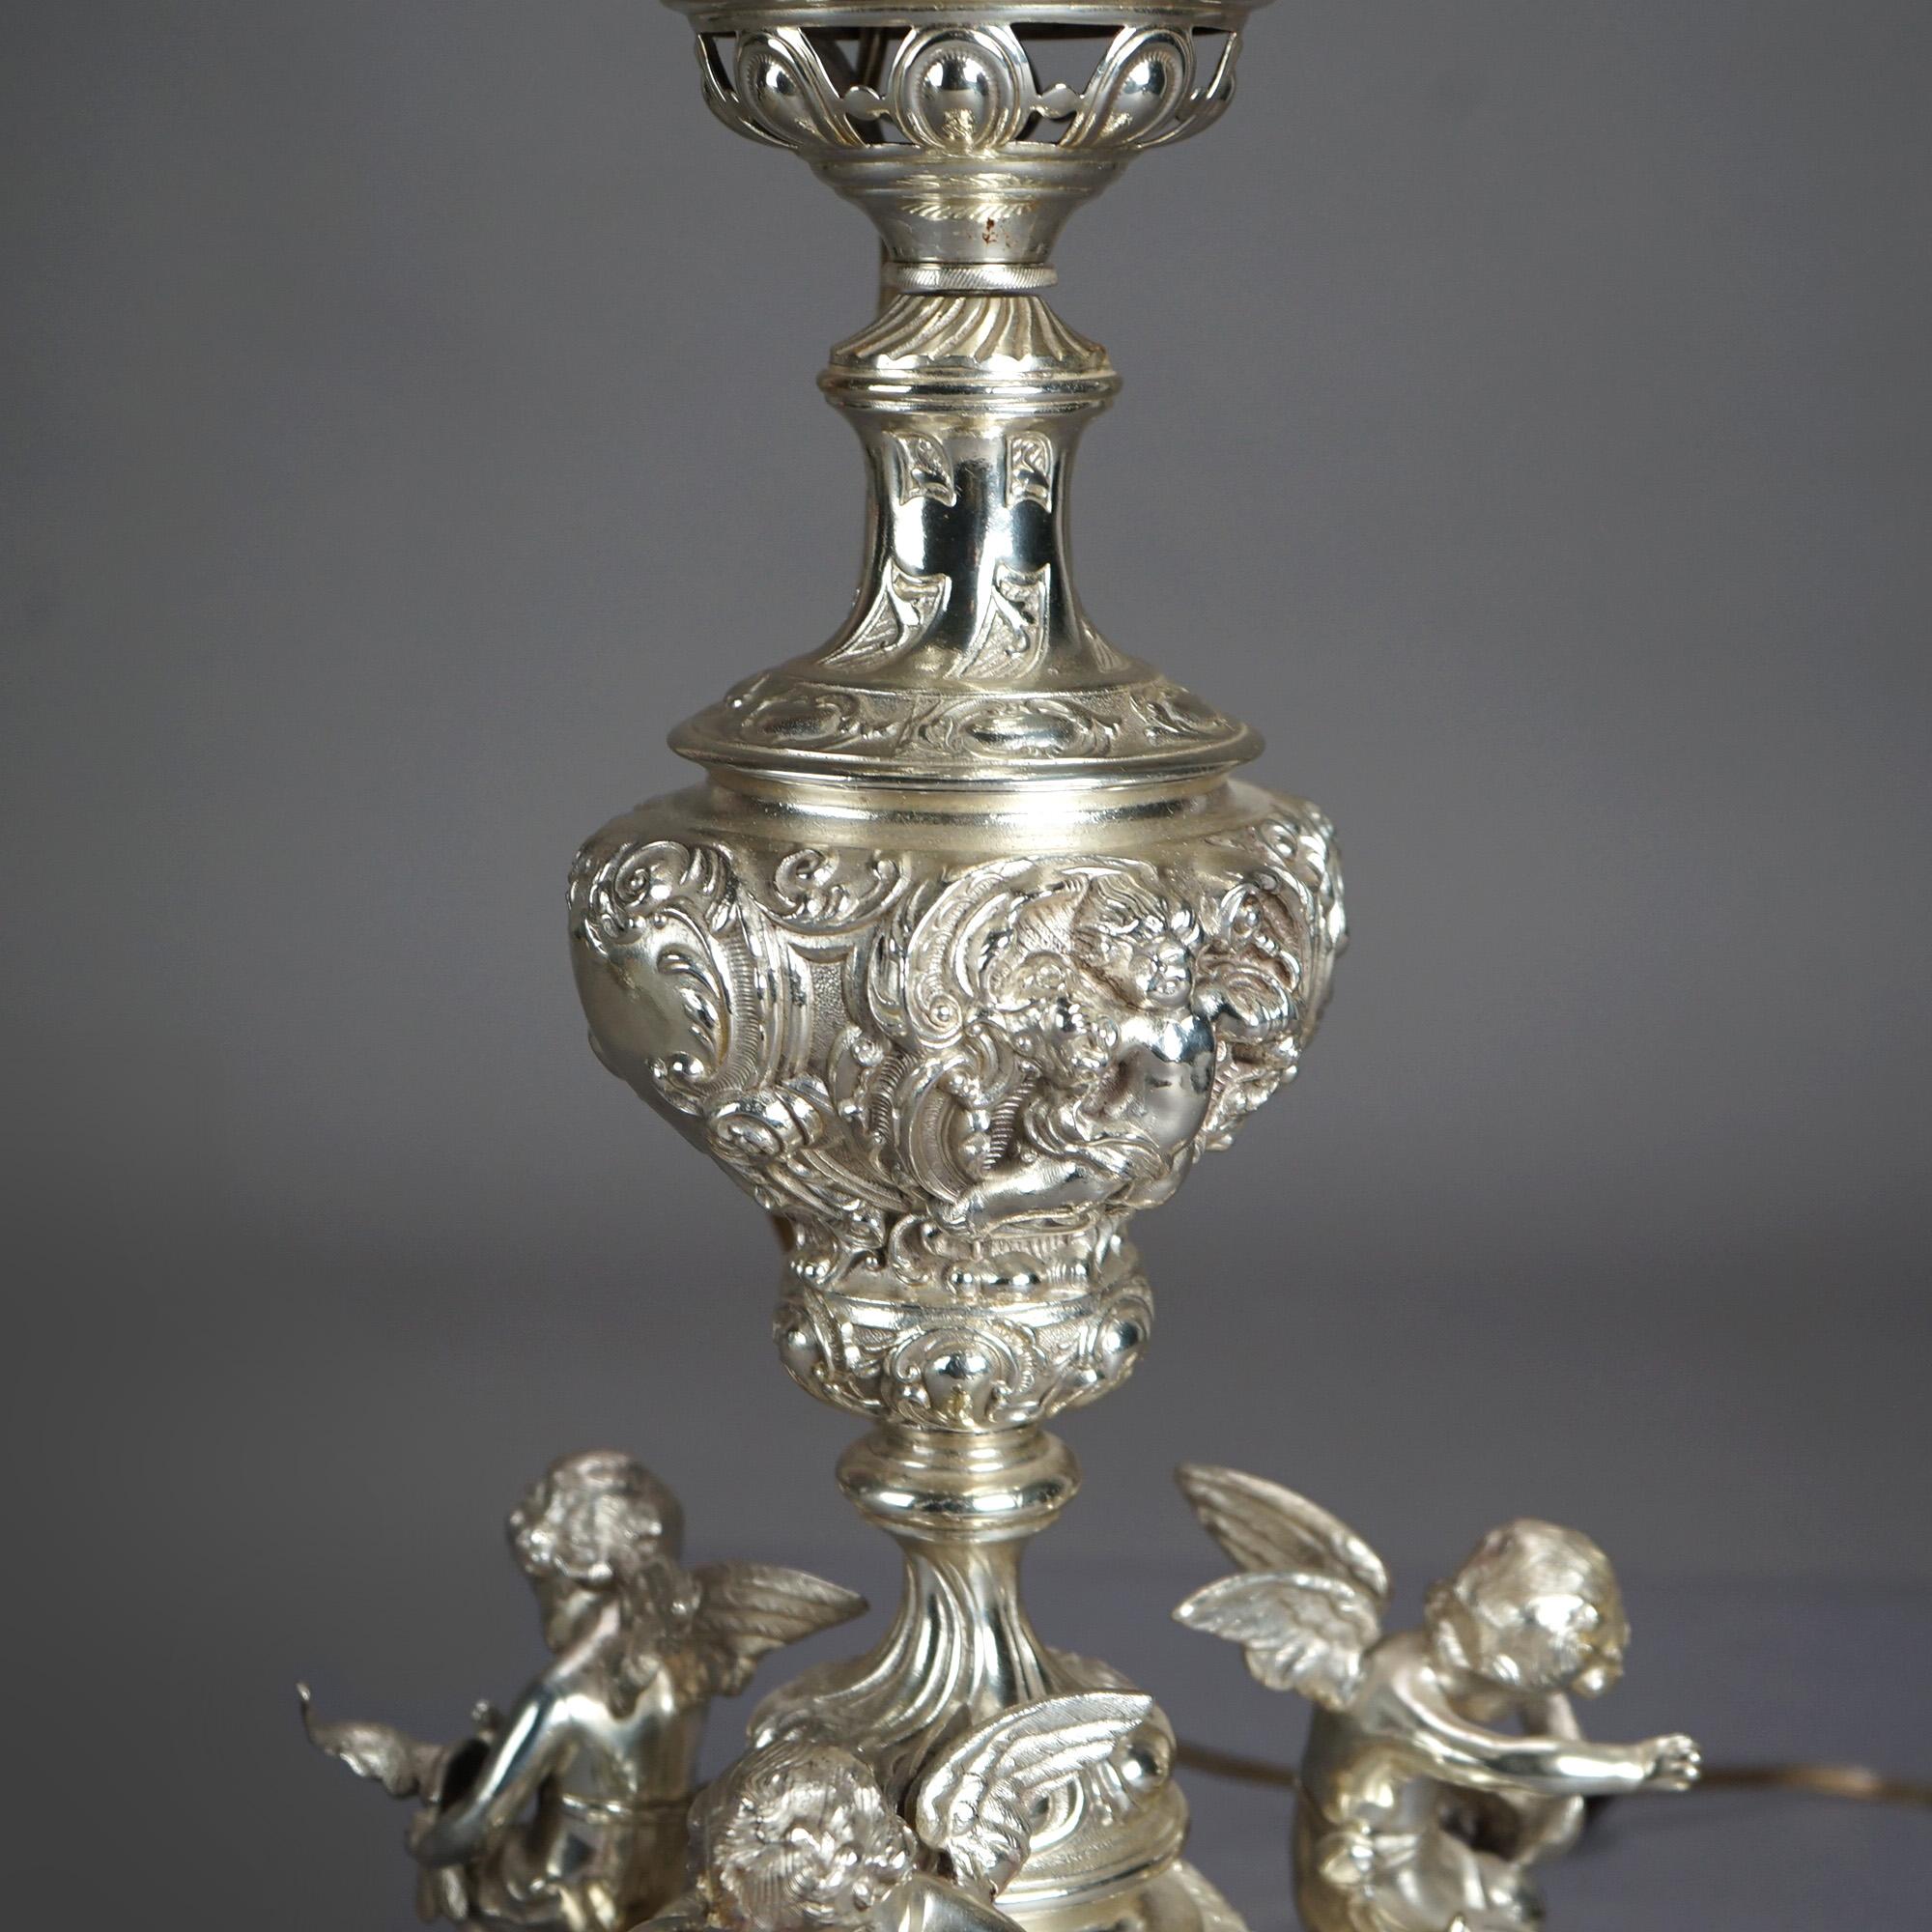 Antique Rococo Figural Silver Plate Parlor Lamp With Winged Cherubs c1890 For Sale 3